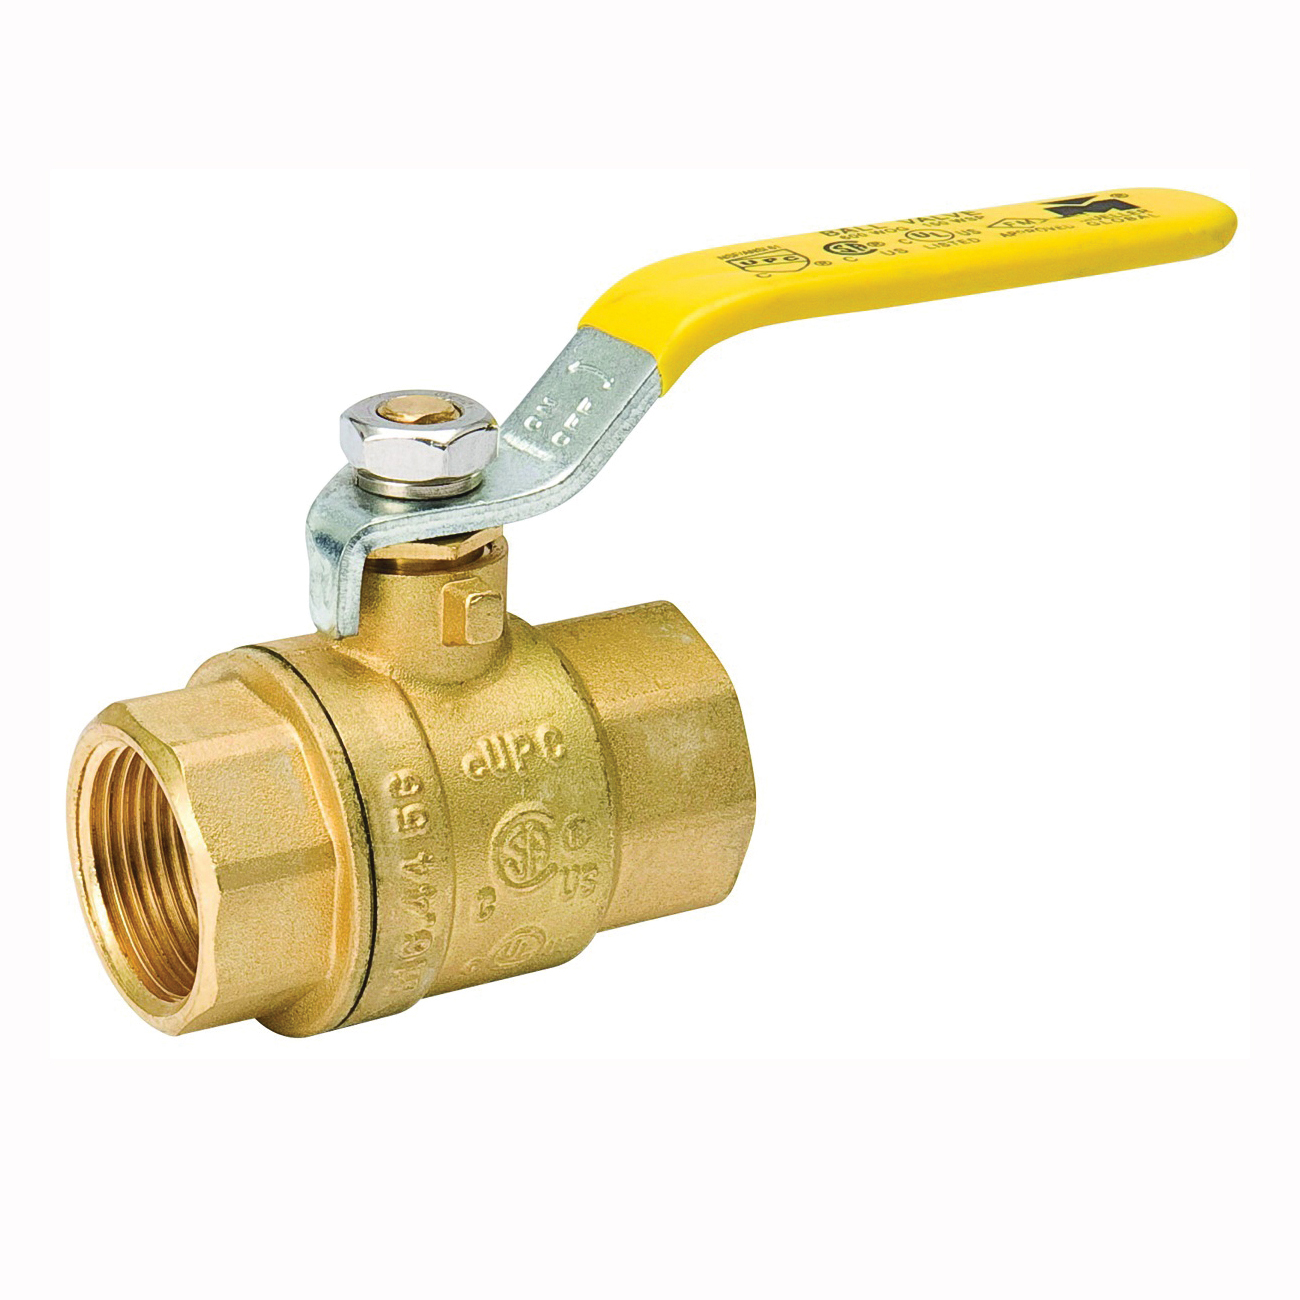 107-824NL Ball Valve, 3/4 in Connection, FPT x FPT, 600/150 psi Pressure, Manual Actuator, Brass Body